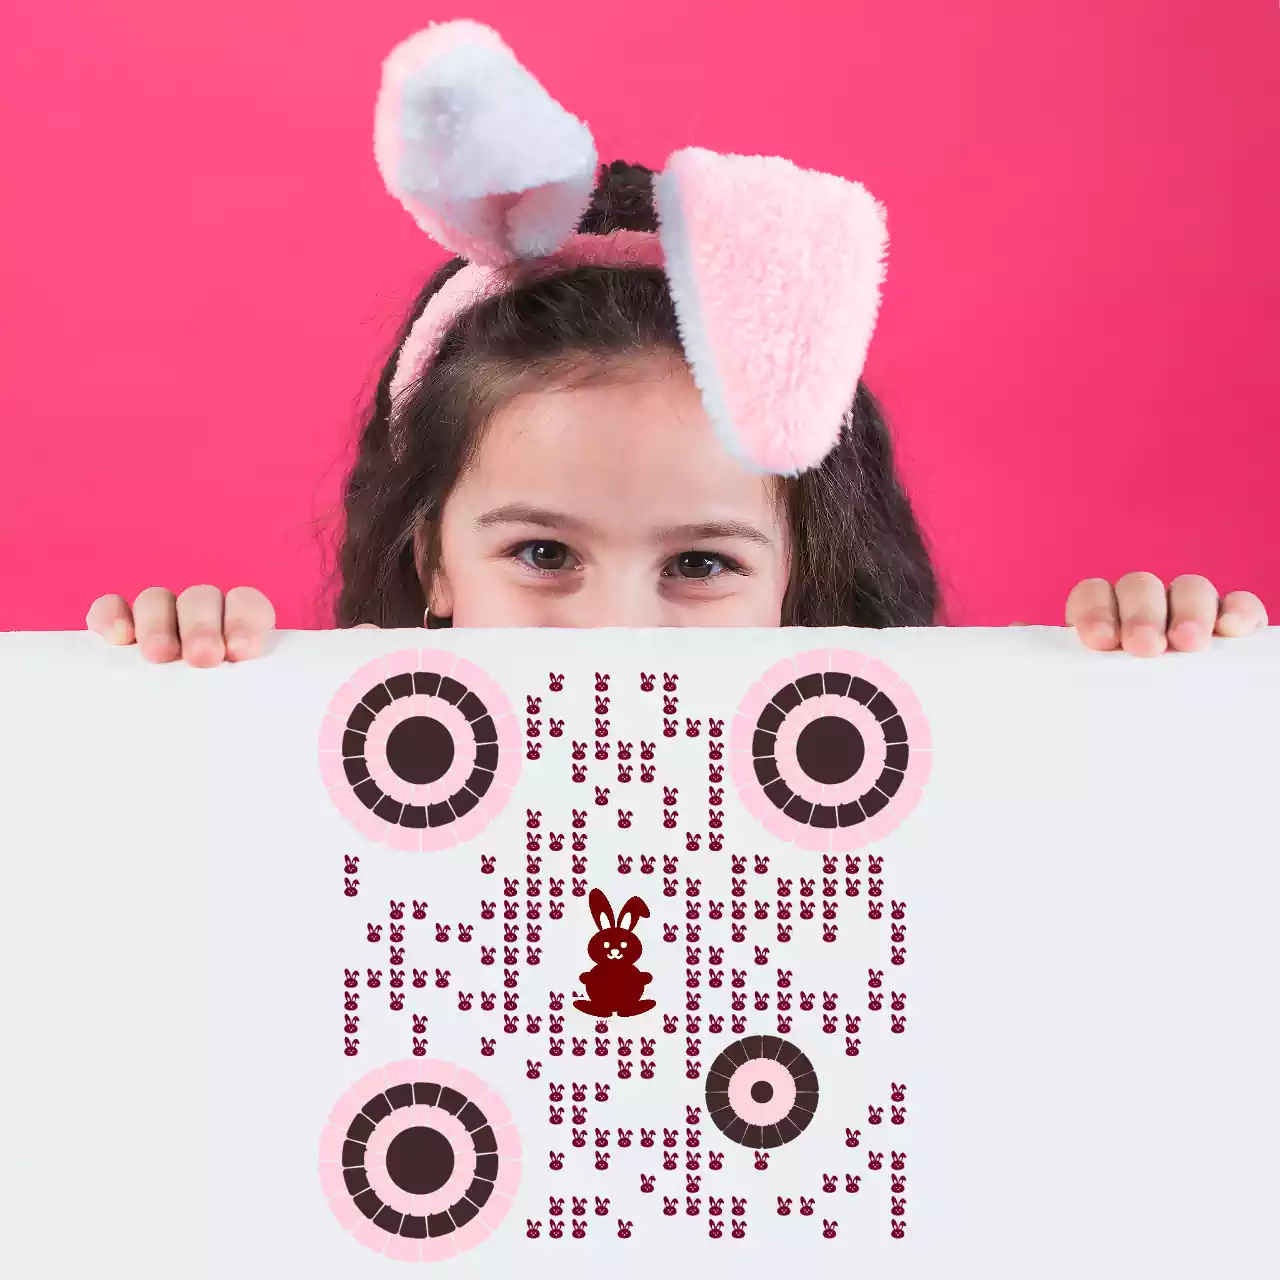 QrcodeLab online qr code generator - qr code image editor - eater theme qr code with young girl and bunny ears